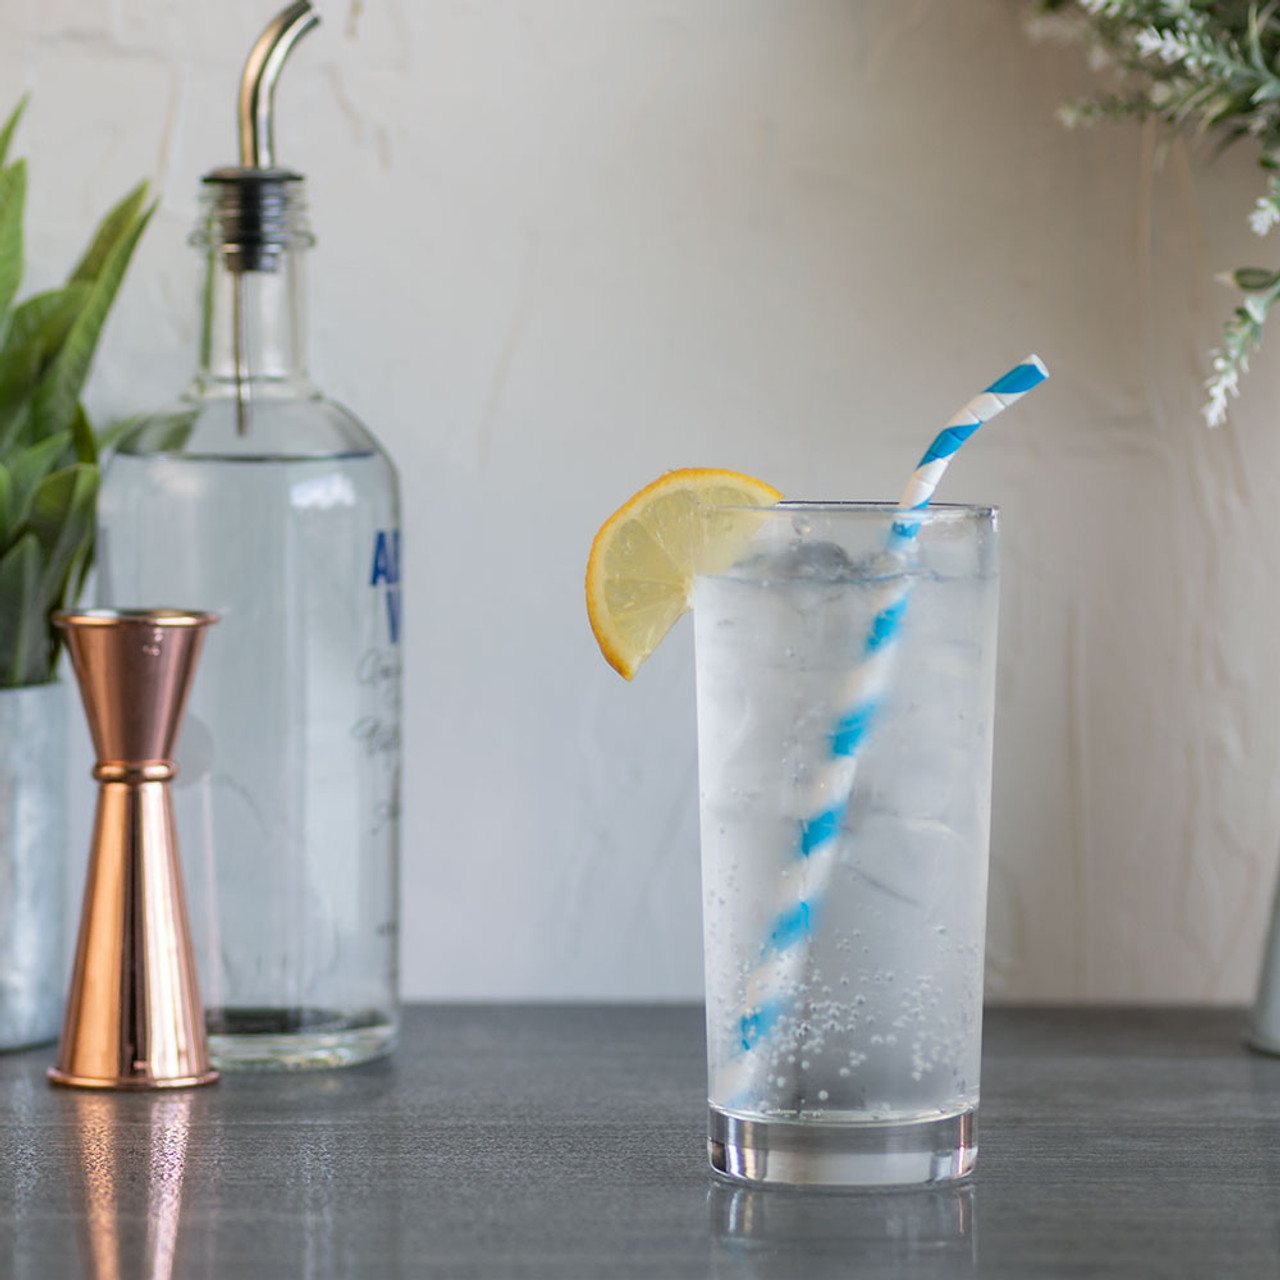 https://cdn11.bigcommerce.com/s-cznxq08r7/images/stencil/1280x1280/products/2850/1596/703442-aardvark_eco-flex_bendable_paper_drinking_straws_-_blue_white_stripes_-_7.75_l_-_box_of_400_wrapped_straws_-3__62814.1590765193.jpg?c=1